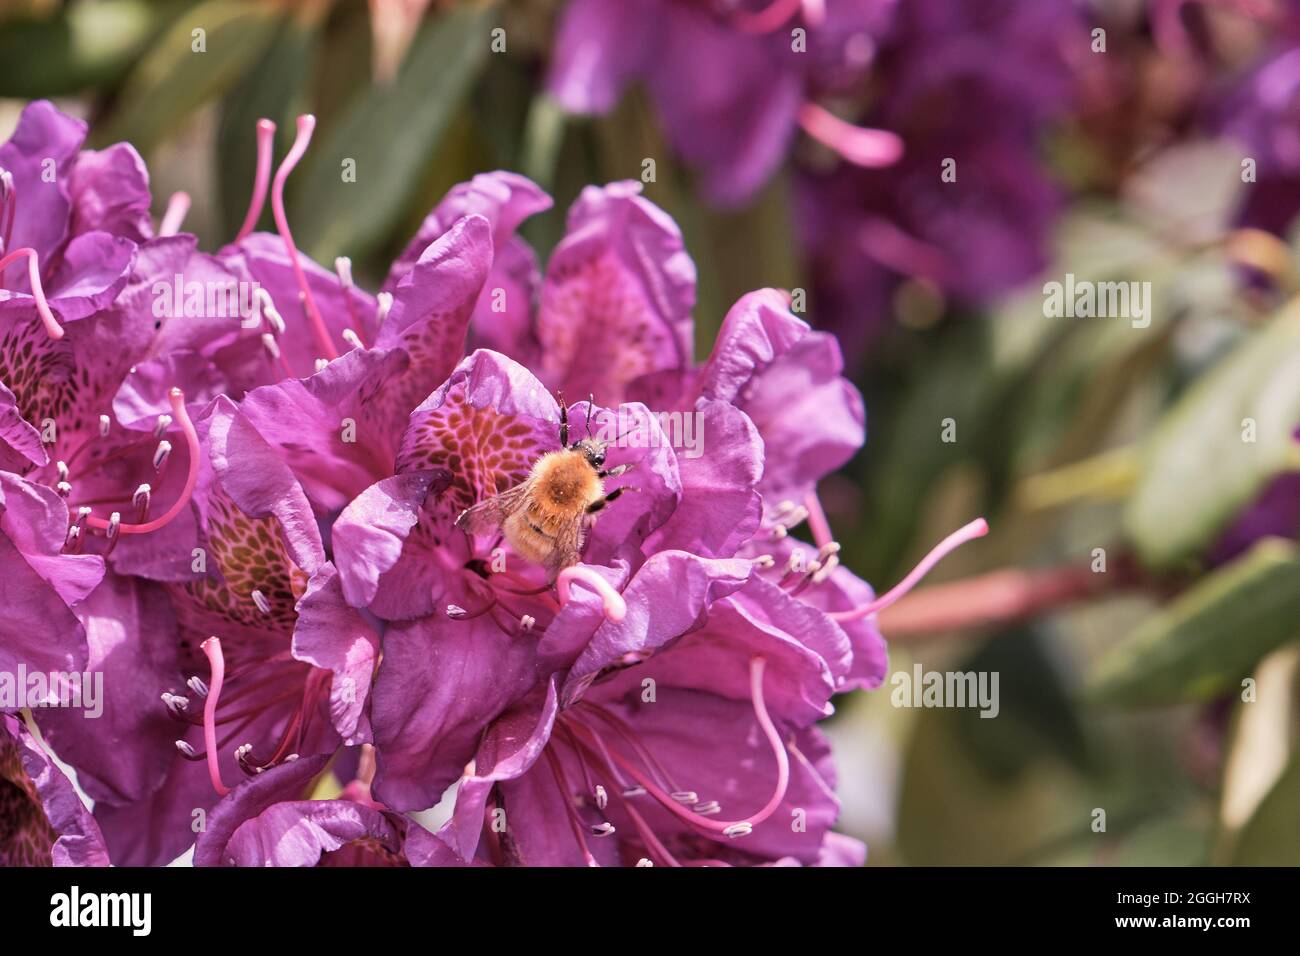 Rhododendron simsii or Azalea purple flowers with foraging bumble bee Stock Photo